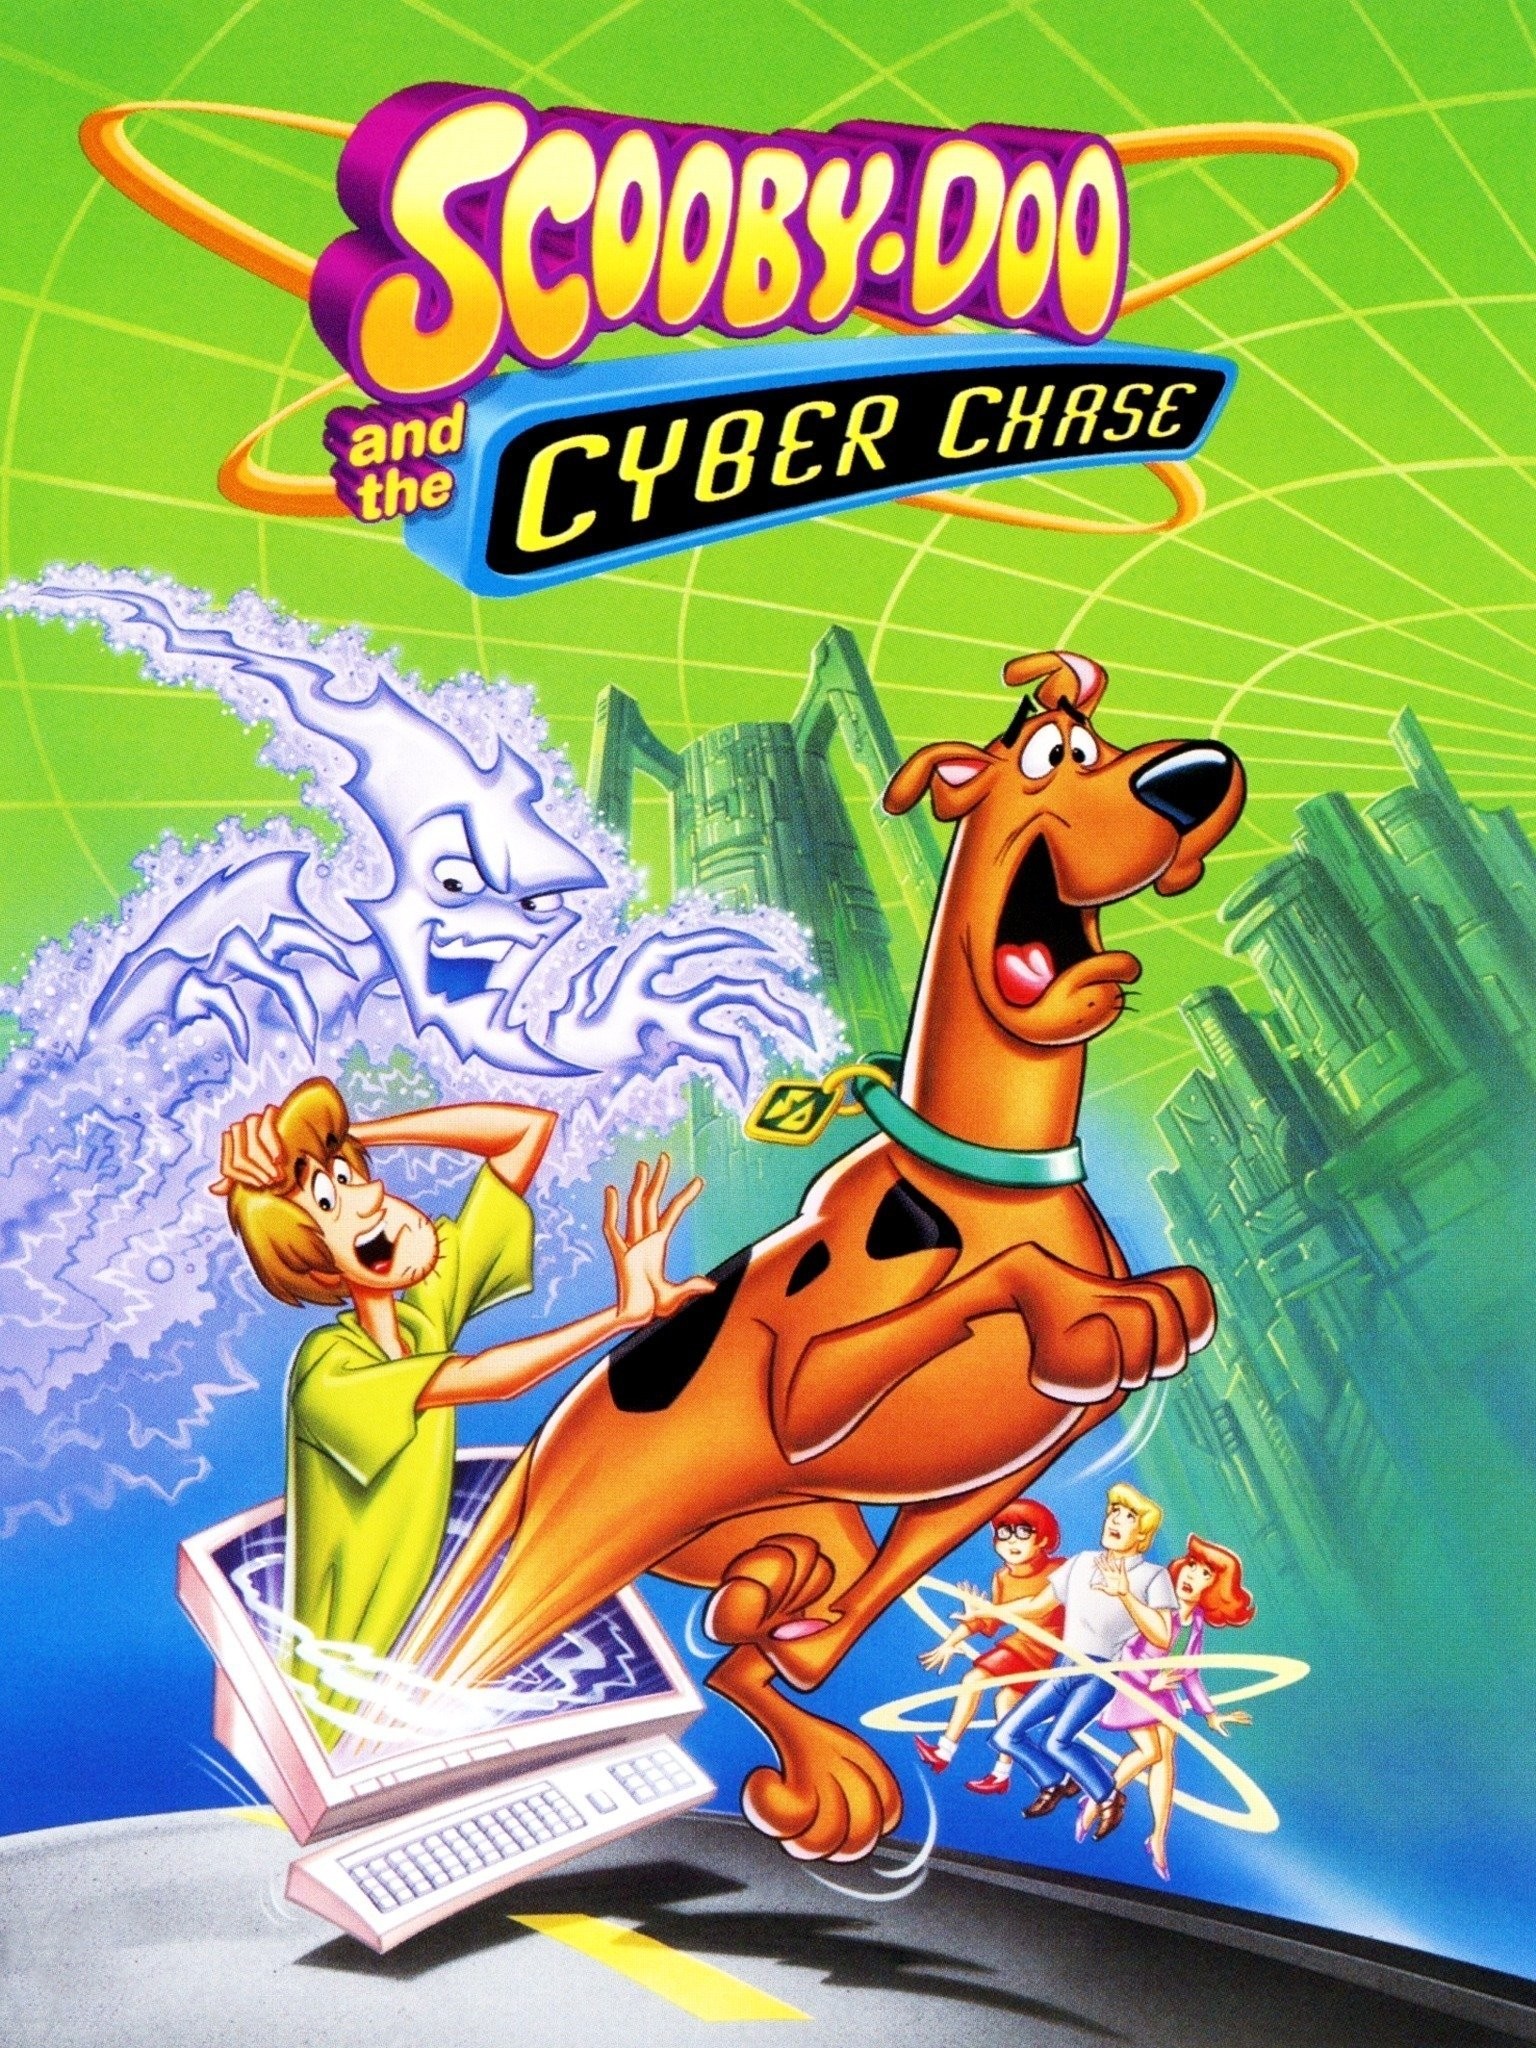 Scooby-Doo, Where Are You Now! - Rotten Tomatoes